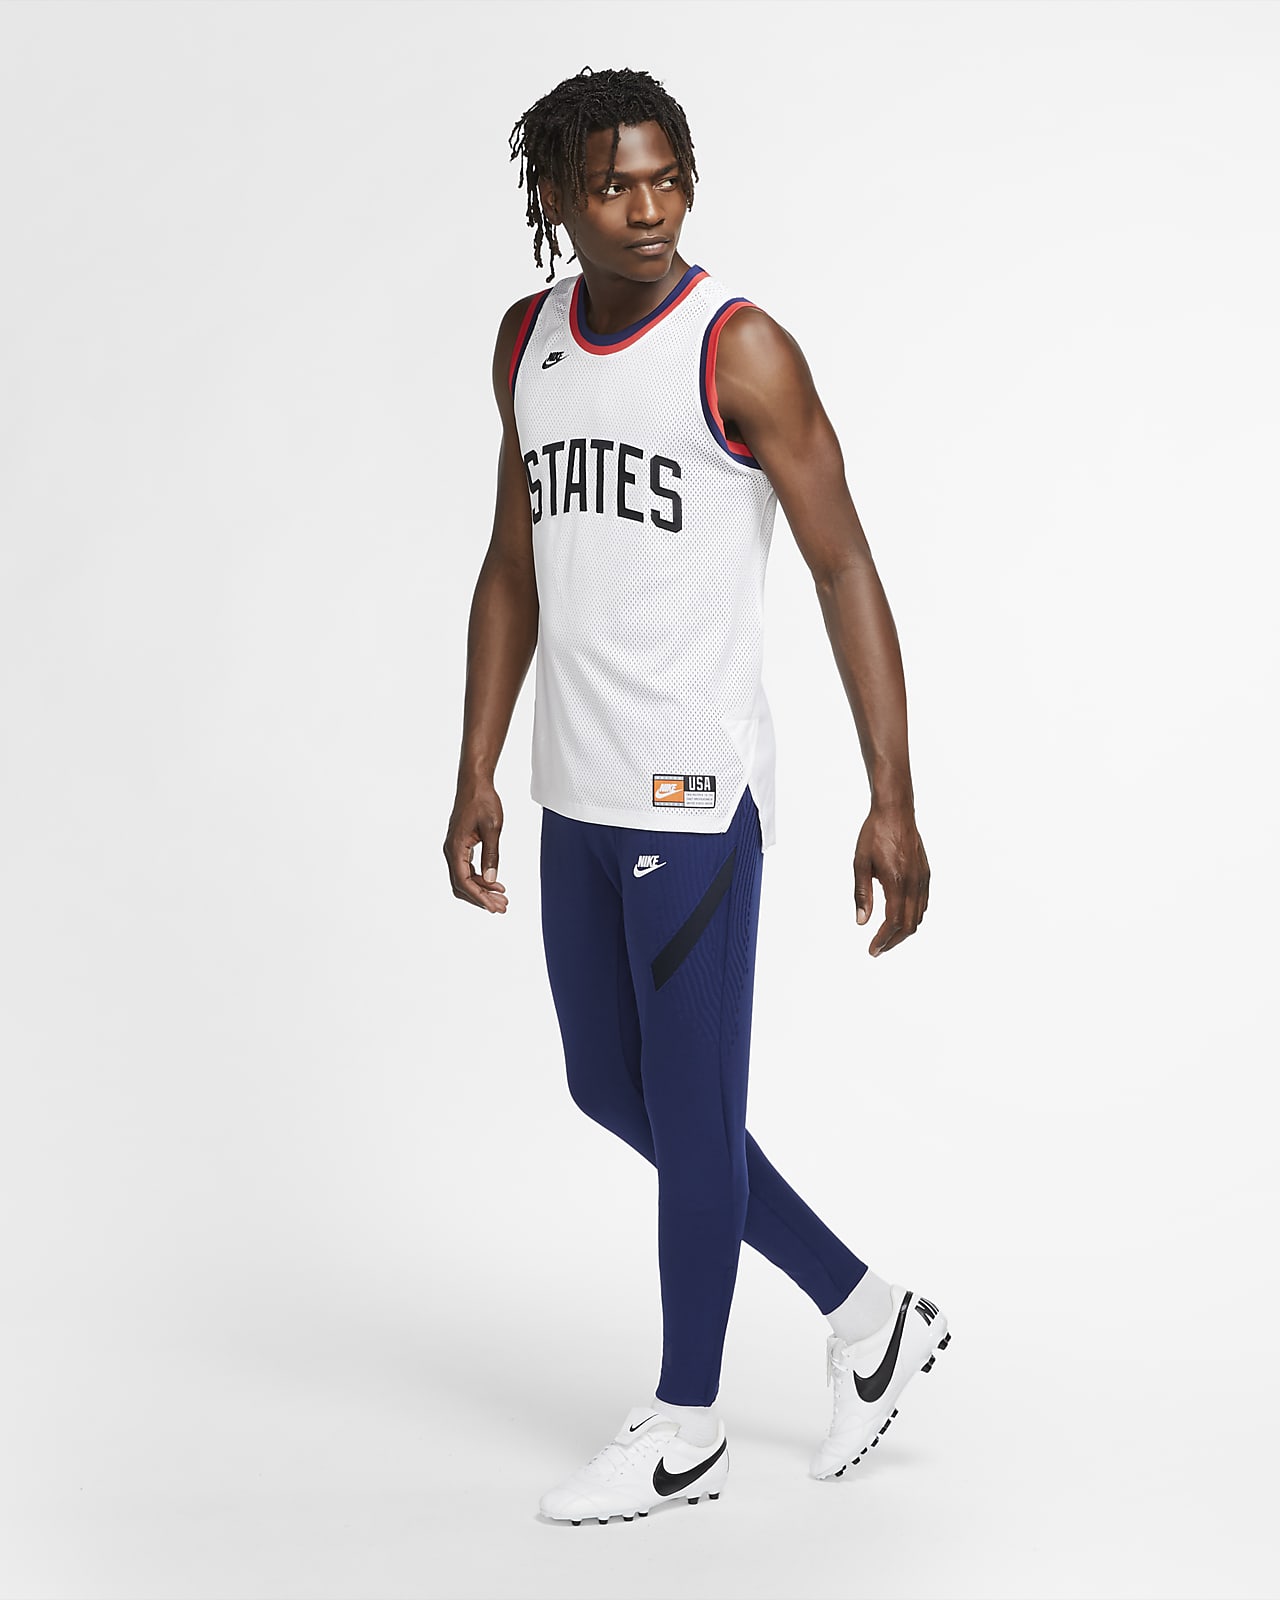 Nike Basketball Firm Activewear Tops for Men for Sale